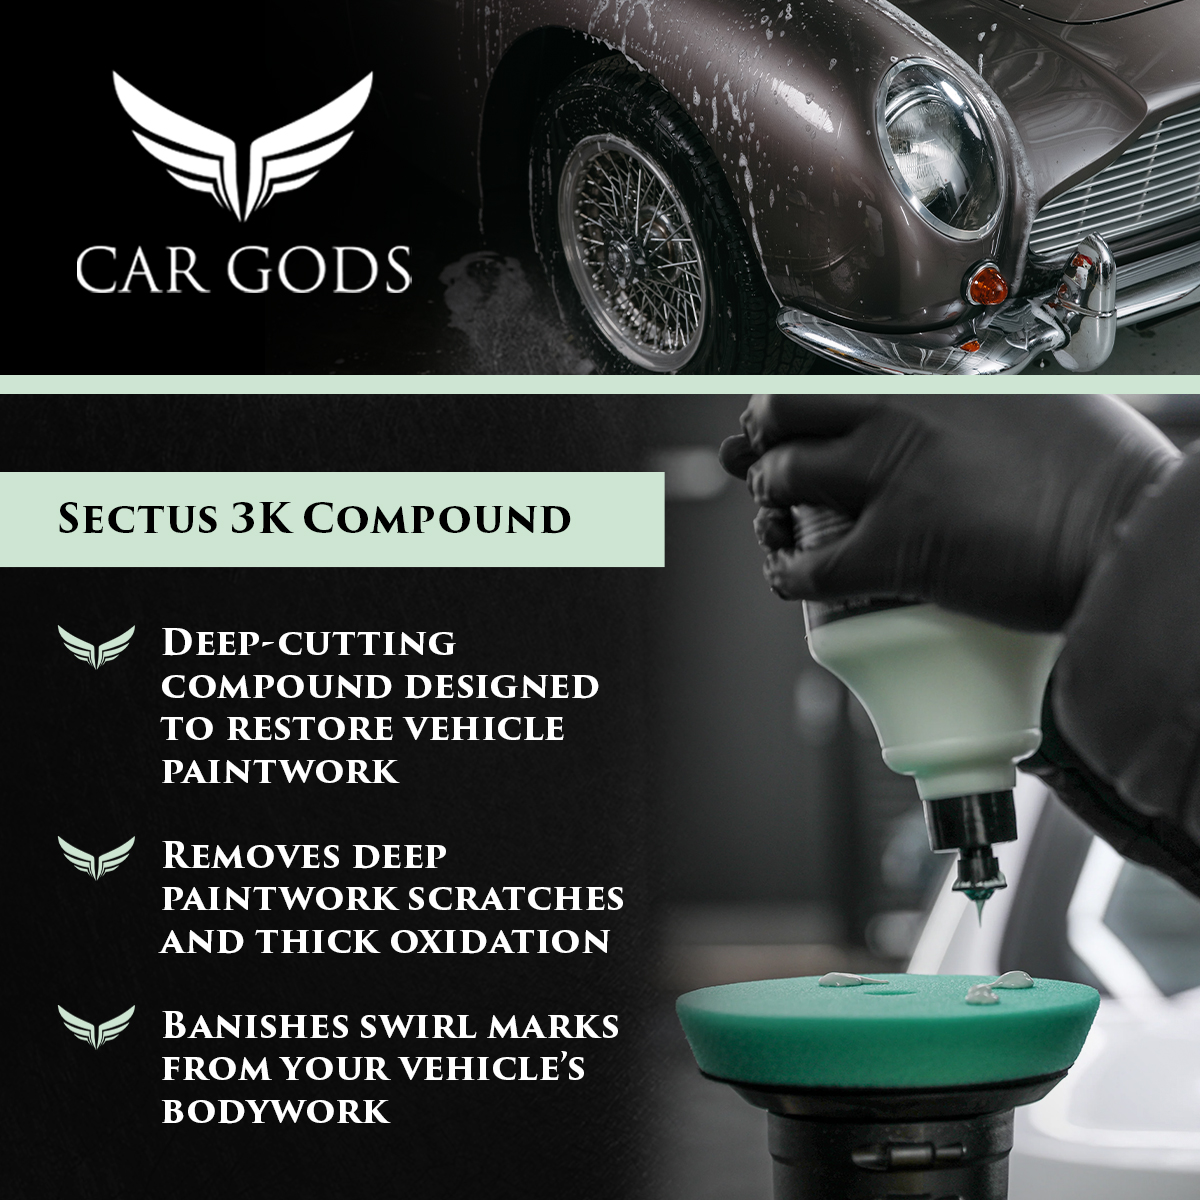 Car Gods Sectus 3K Compound. Deep-cutting silicone-free compound designed as a first stage polishing compound to restore vehicle paintwork. Removes deep paintwork scratches, thick oxidation, and swirl marks.